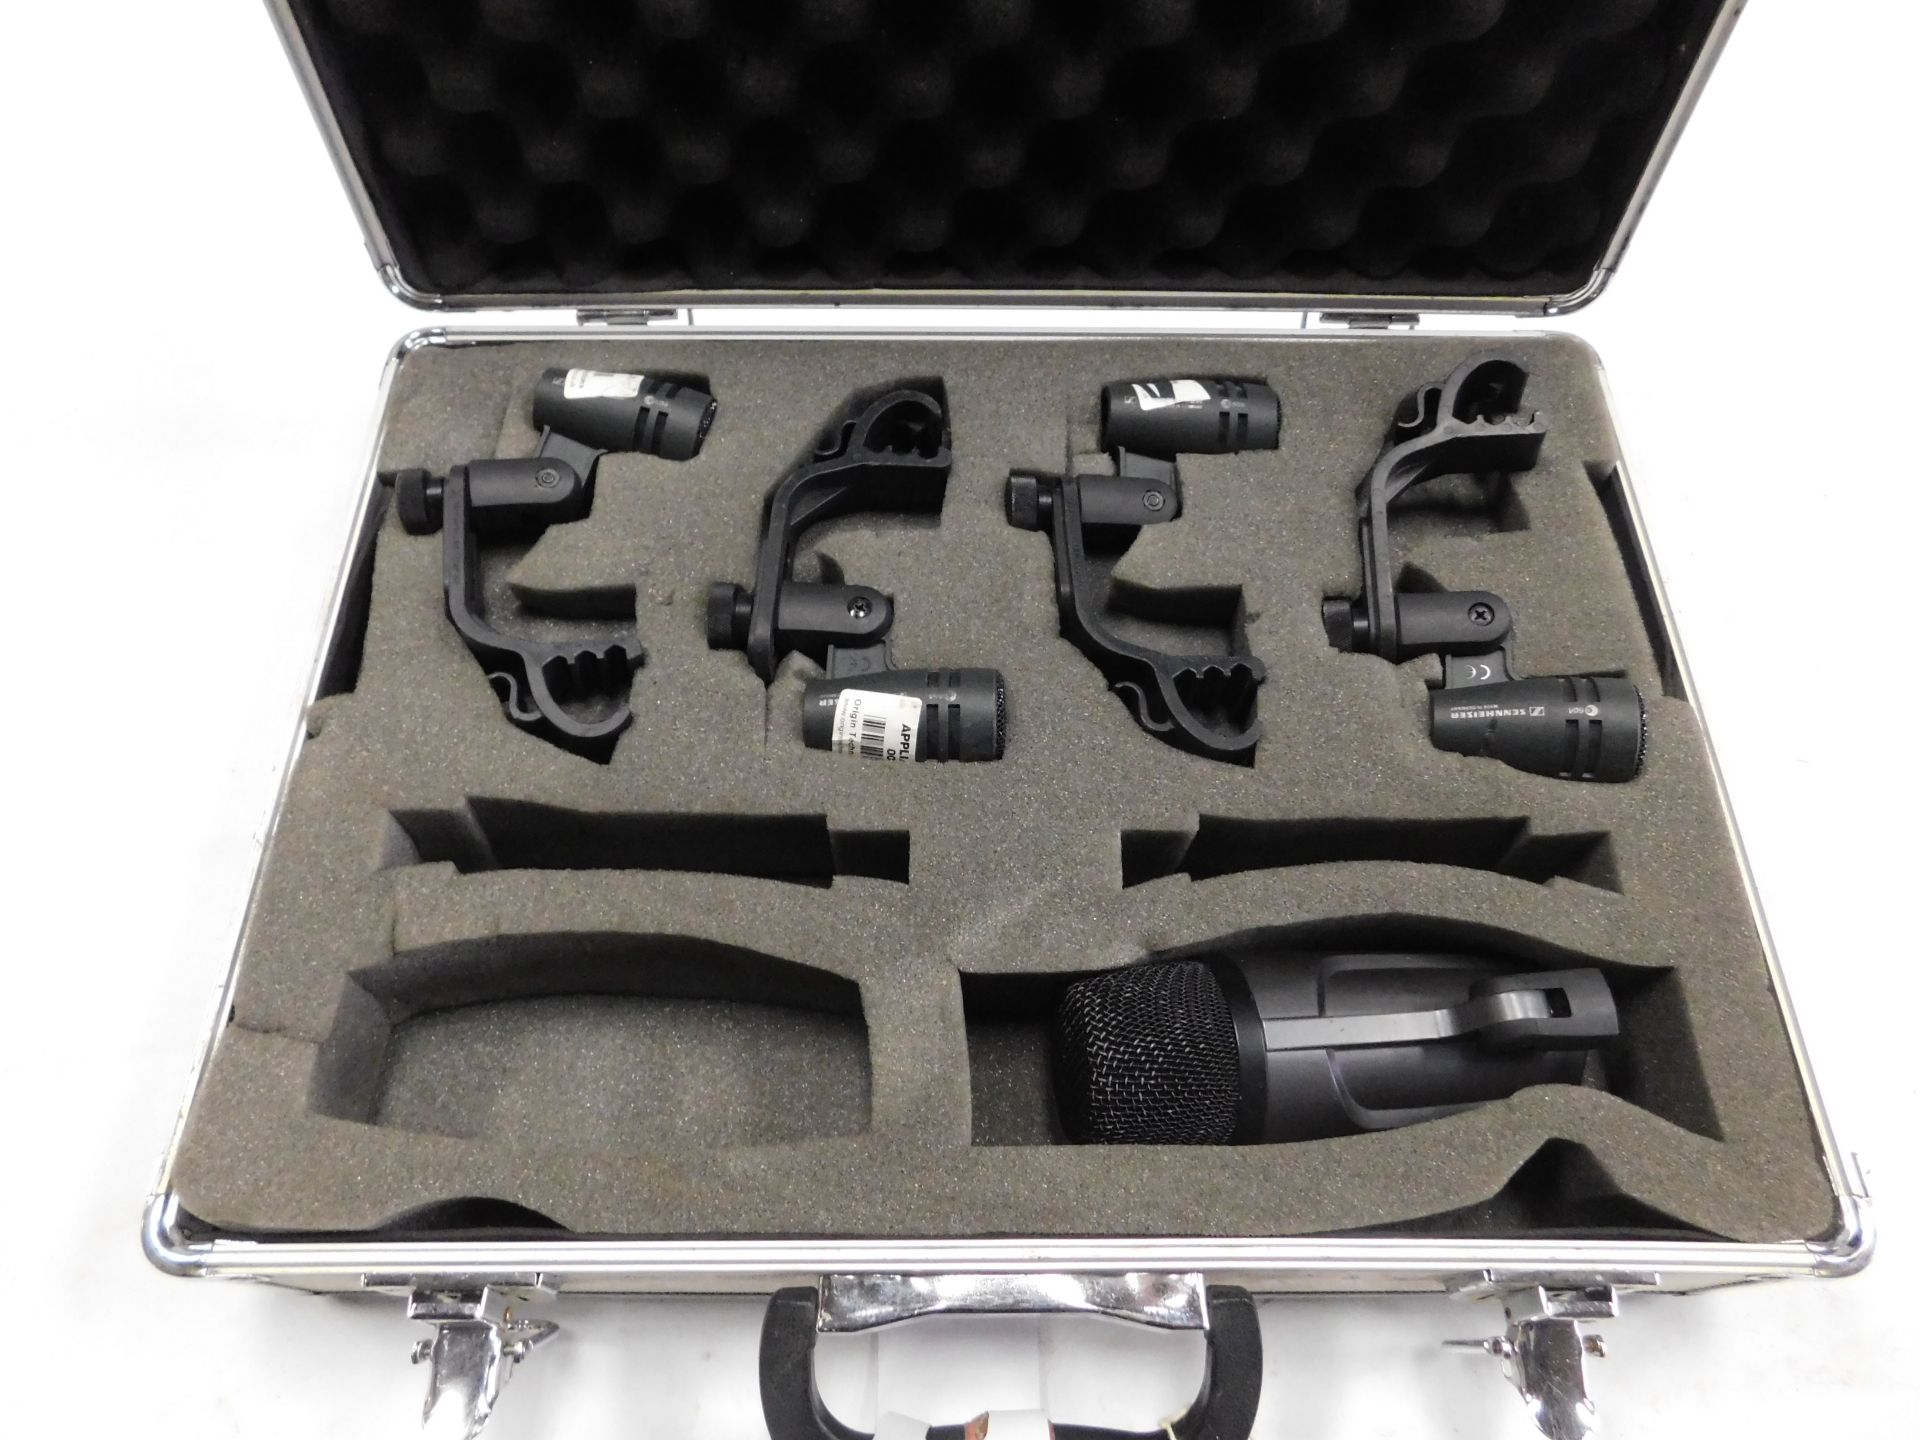 4 Sennheiser e604 Microphones & Sennheiser e602-11 Microphone (Location: Brentwood. Please Refer